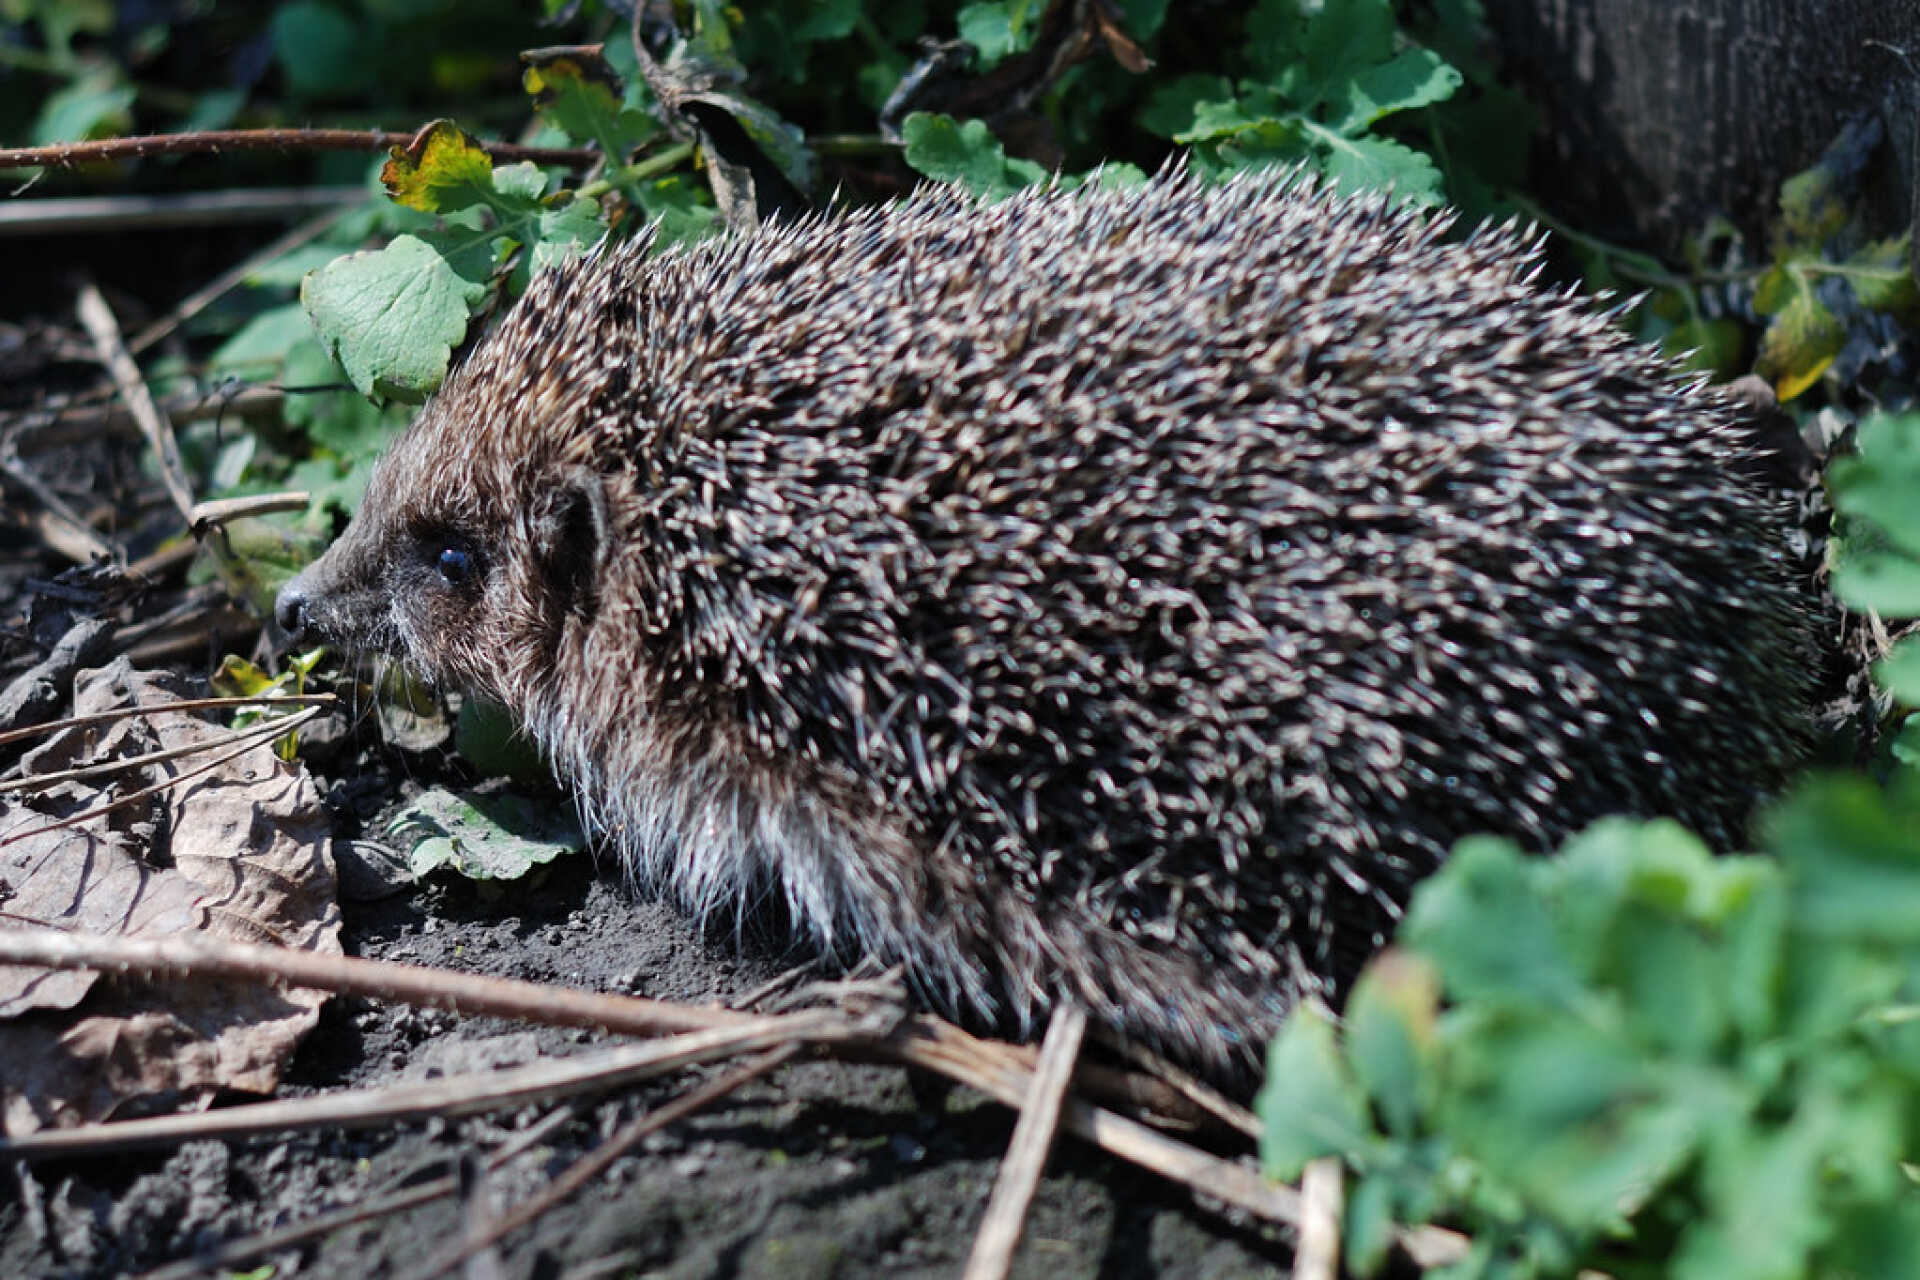 A hedgehog in the undergrowth